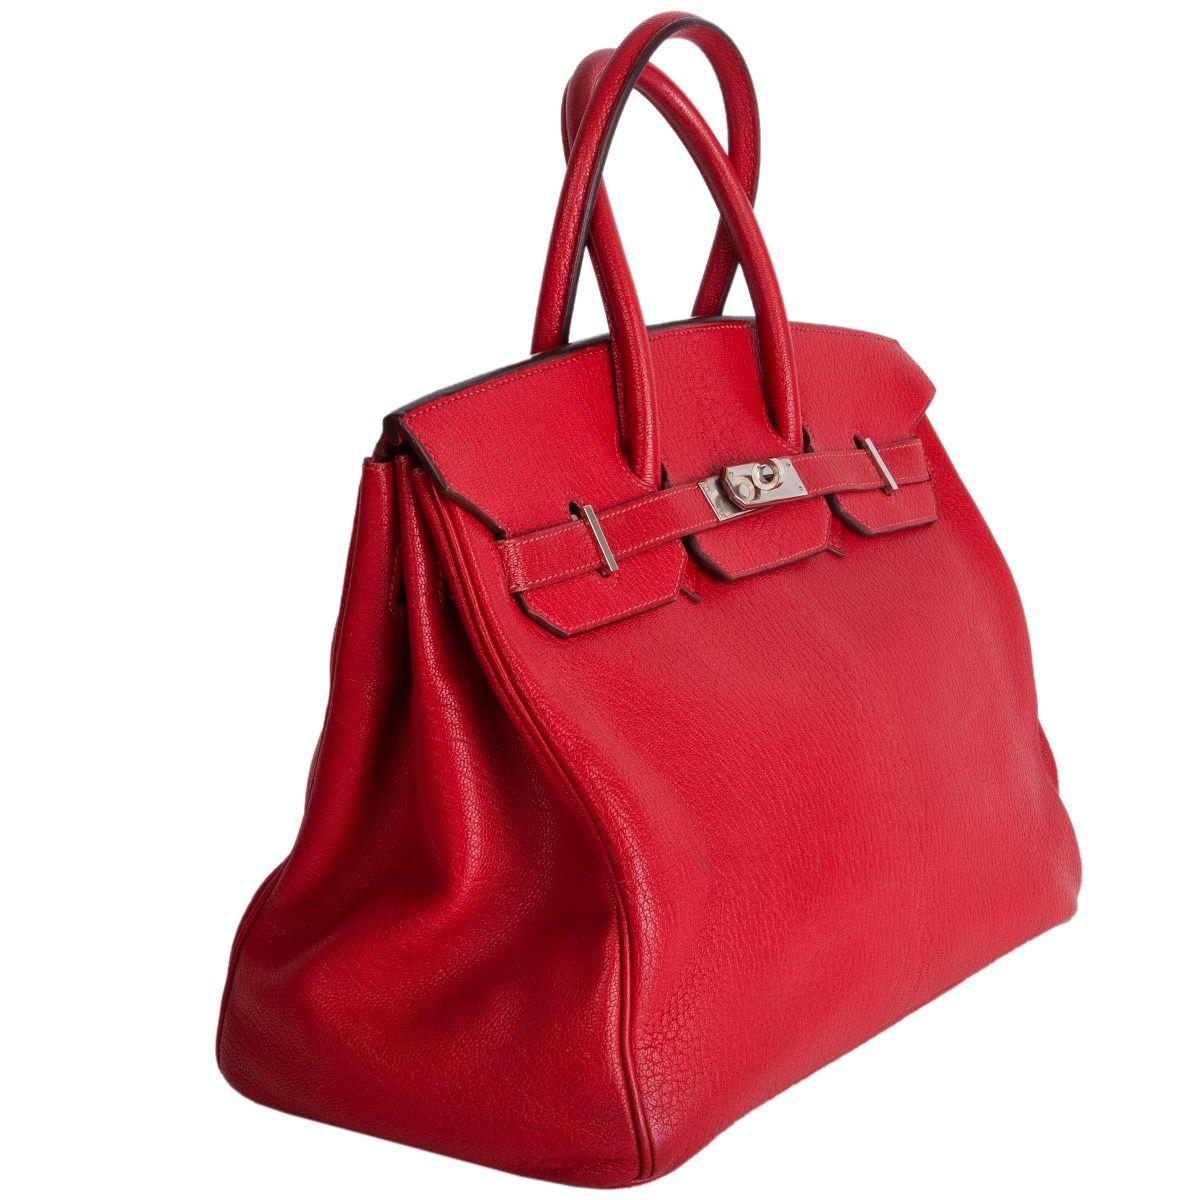 Hermes 'Birkin 35' bag in Rouge Vif (bright red) Chèvre Coromandel (goatskin) leather. Lined in Chèvre (goatskin) leather with an open pocket against the front and a zipper pocket against the back. Has been carried and the leather is cracked a